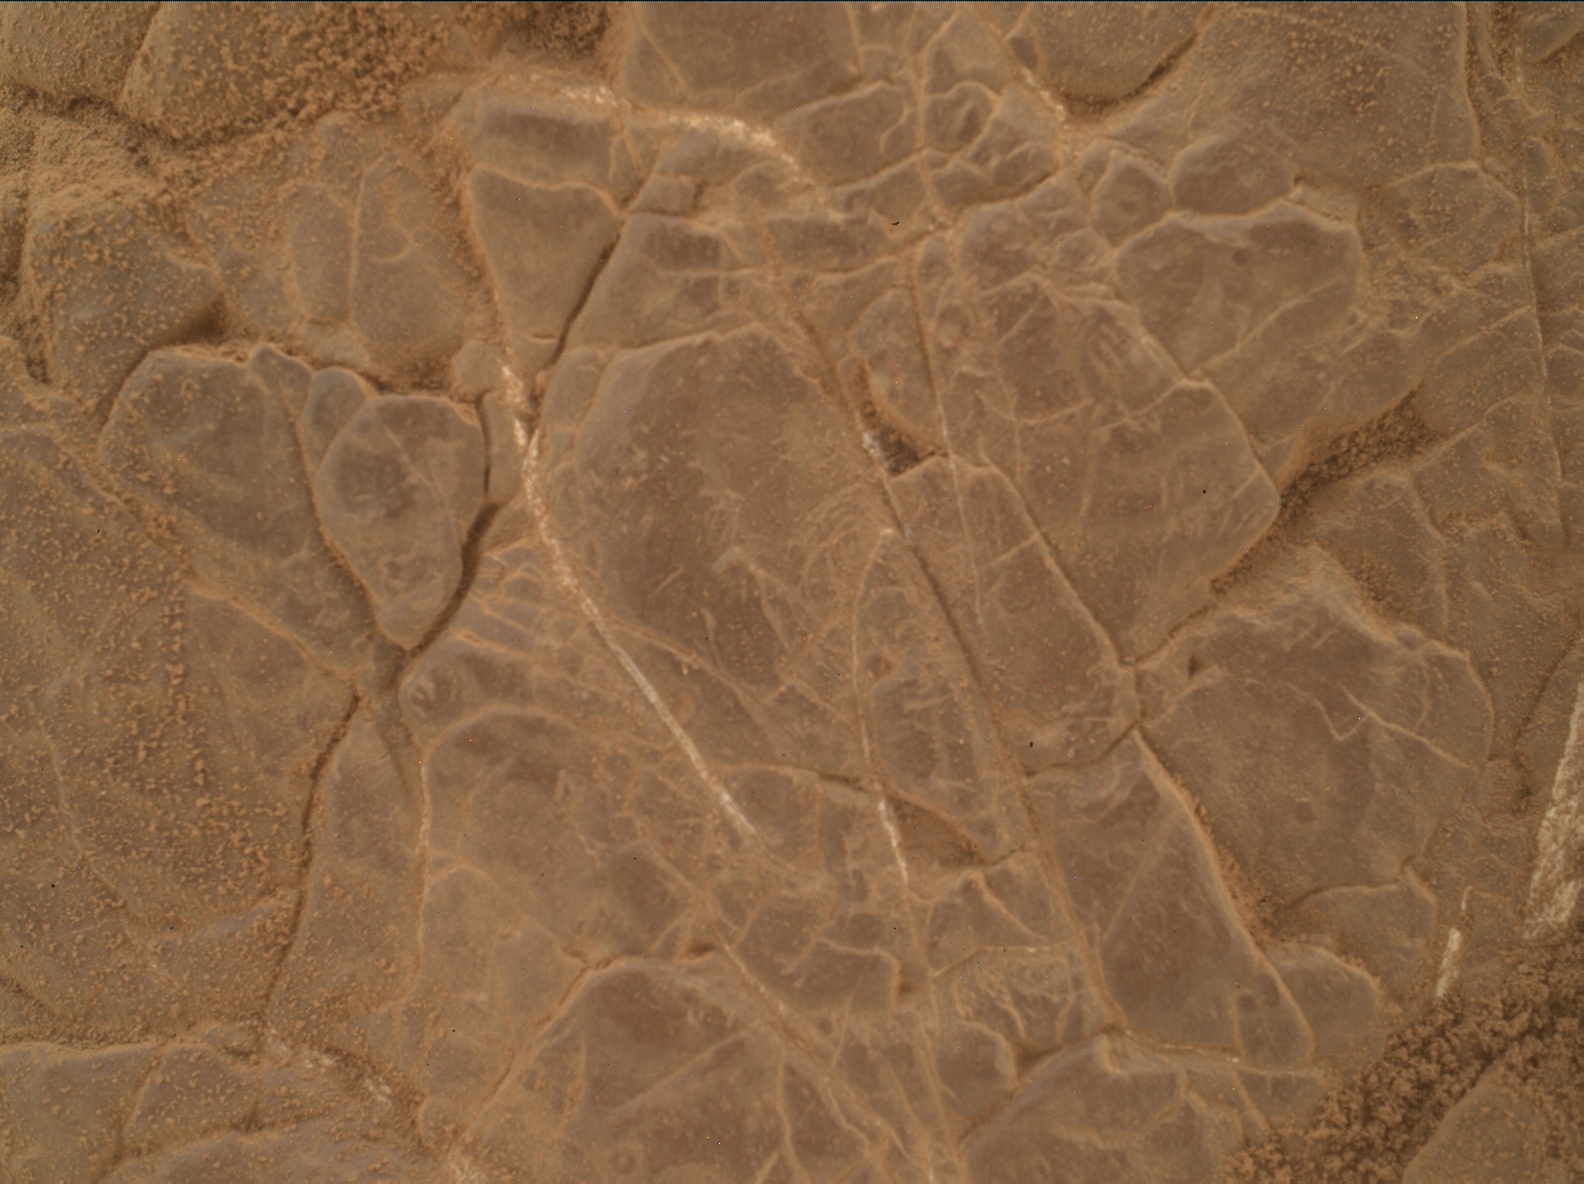 Nasa's Mars rover Curiosity acquired this image using its Mars Hand Lens Imager (MAHLI) on Sol 3017